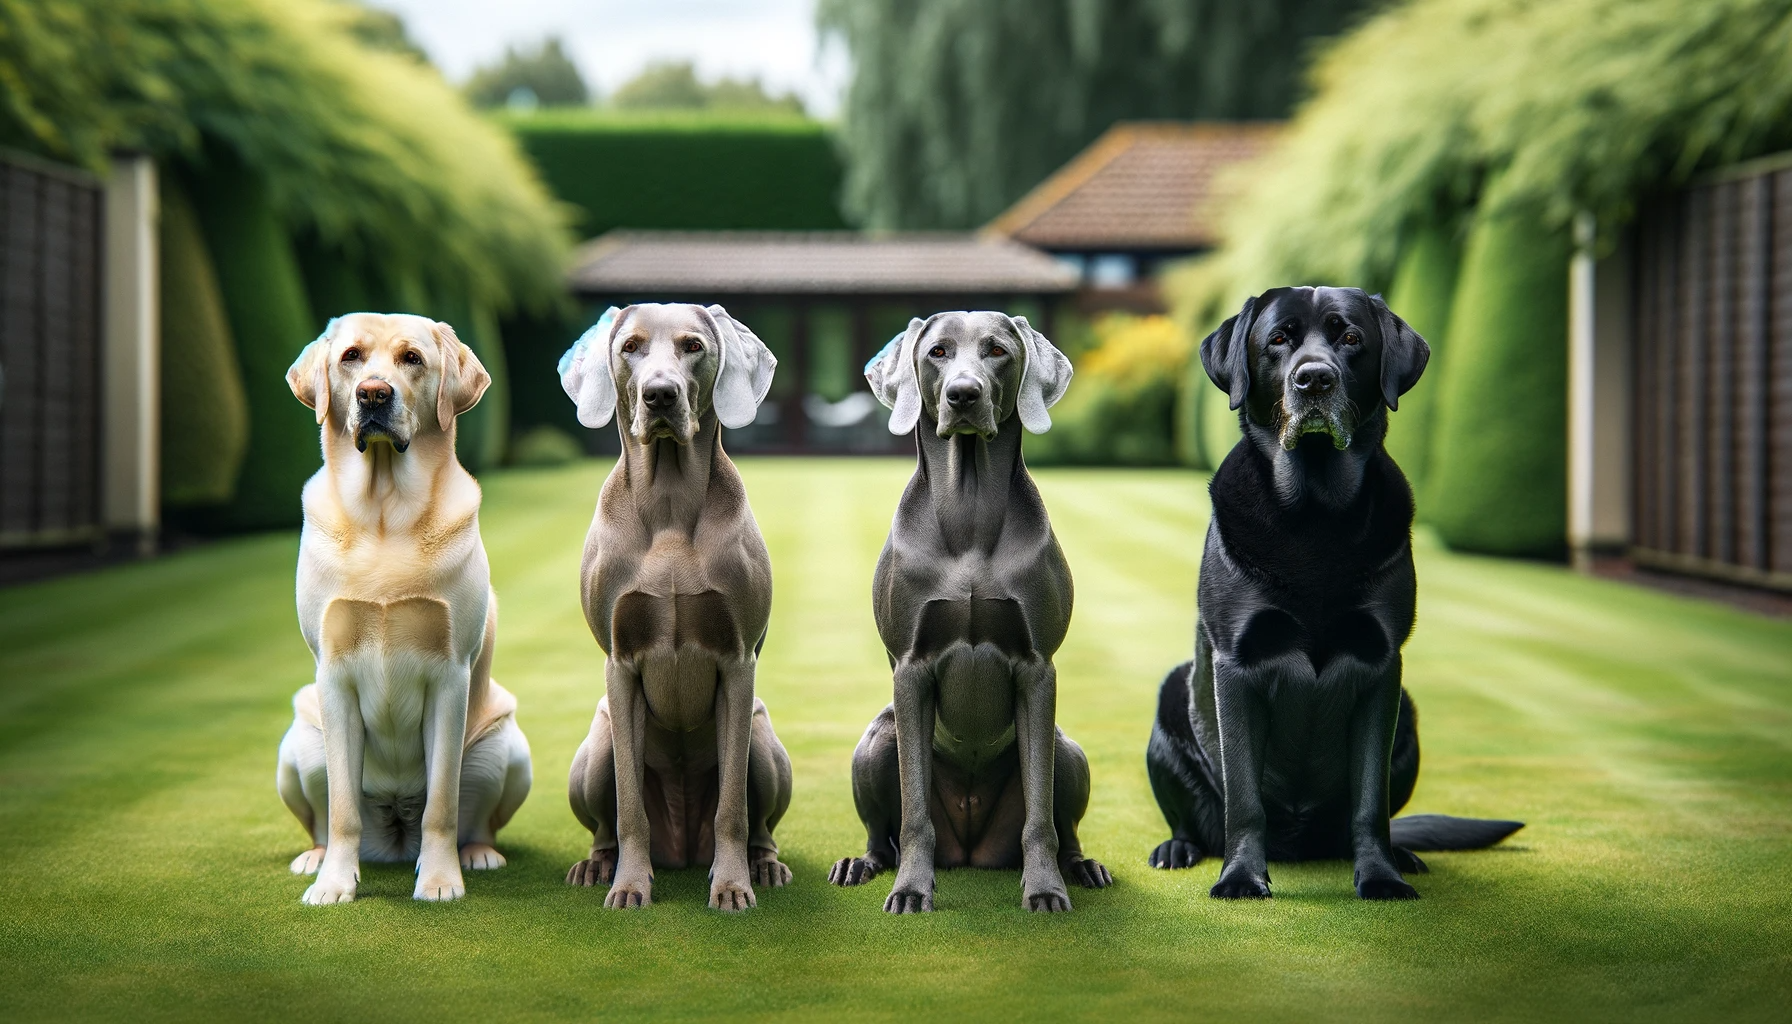 Labmaraner sitting obediently next to a Weimaraner and a Labrador